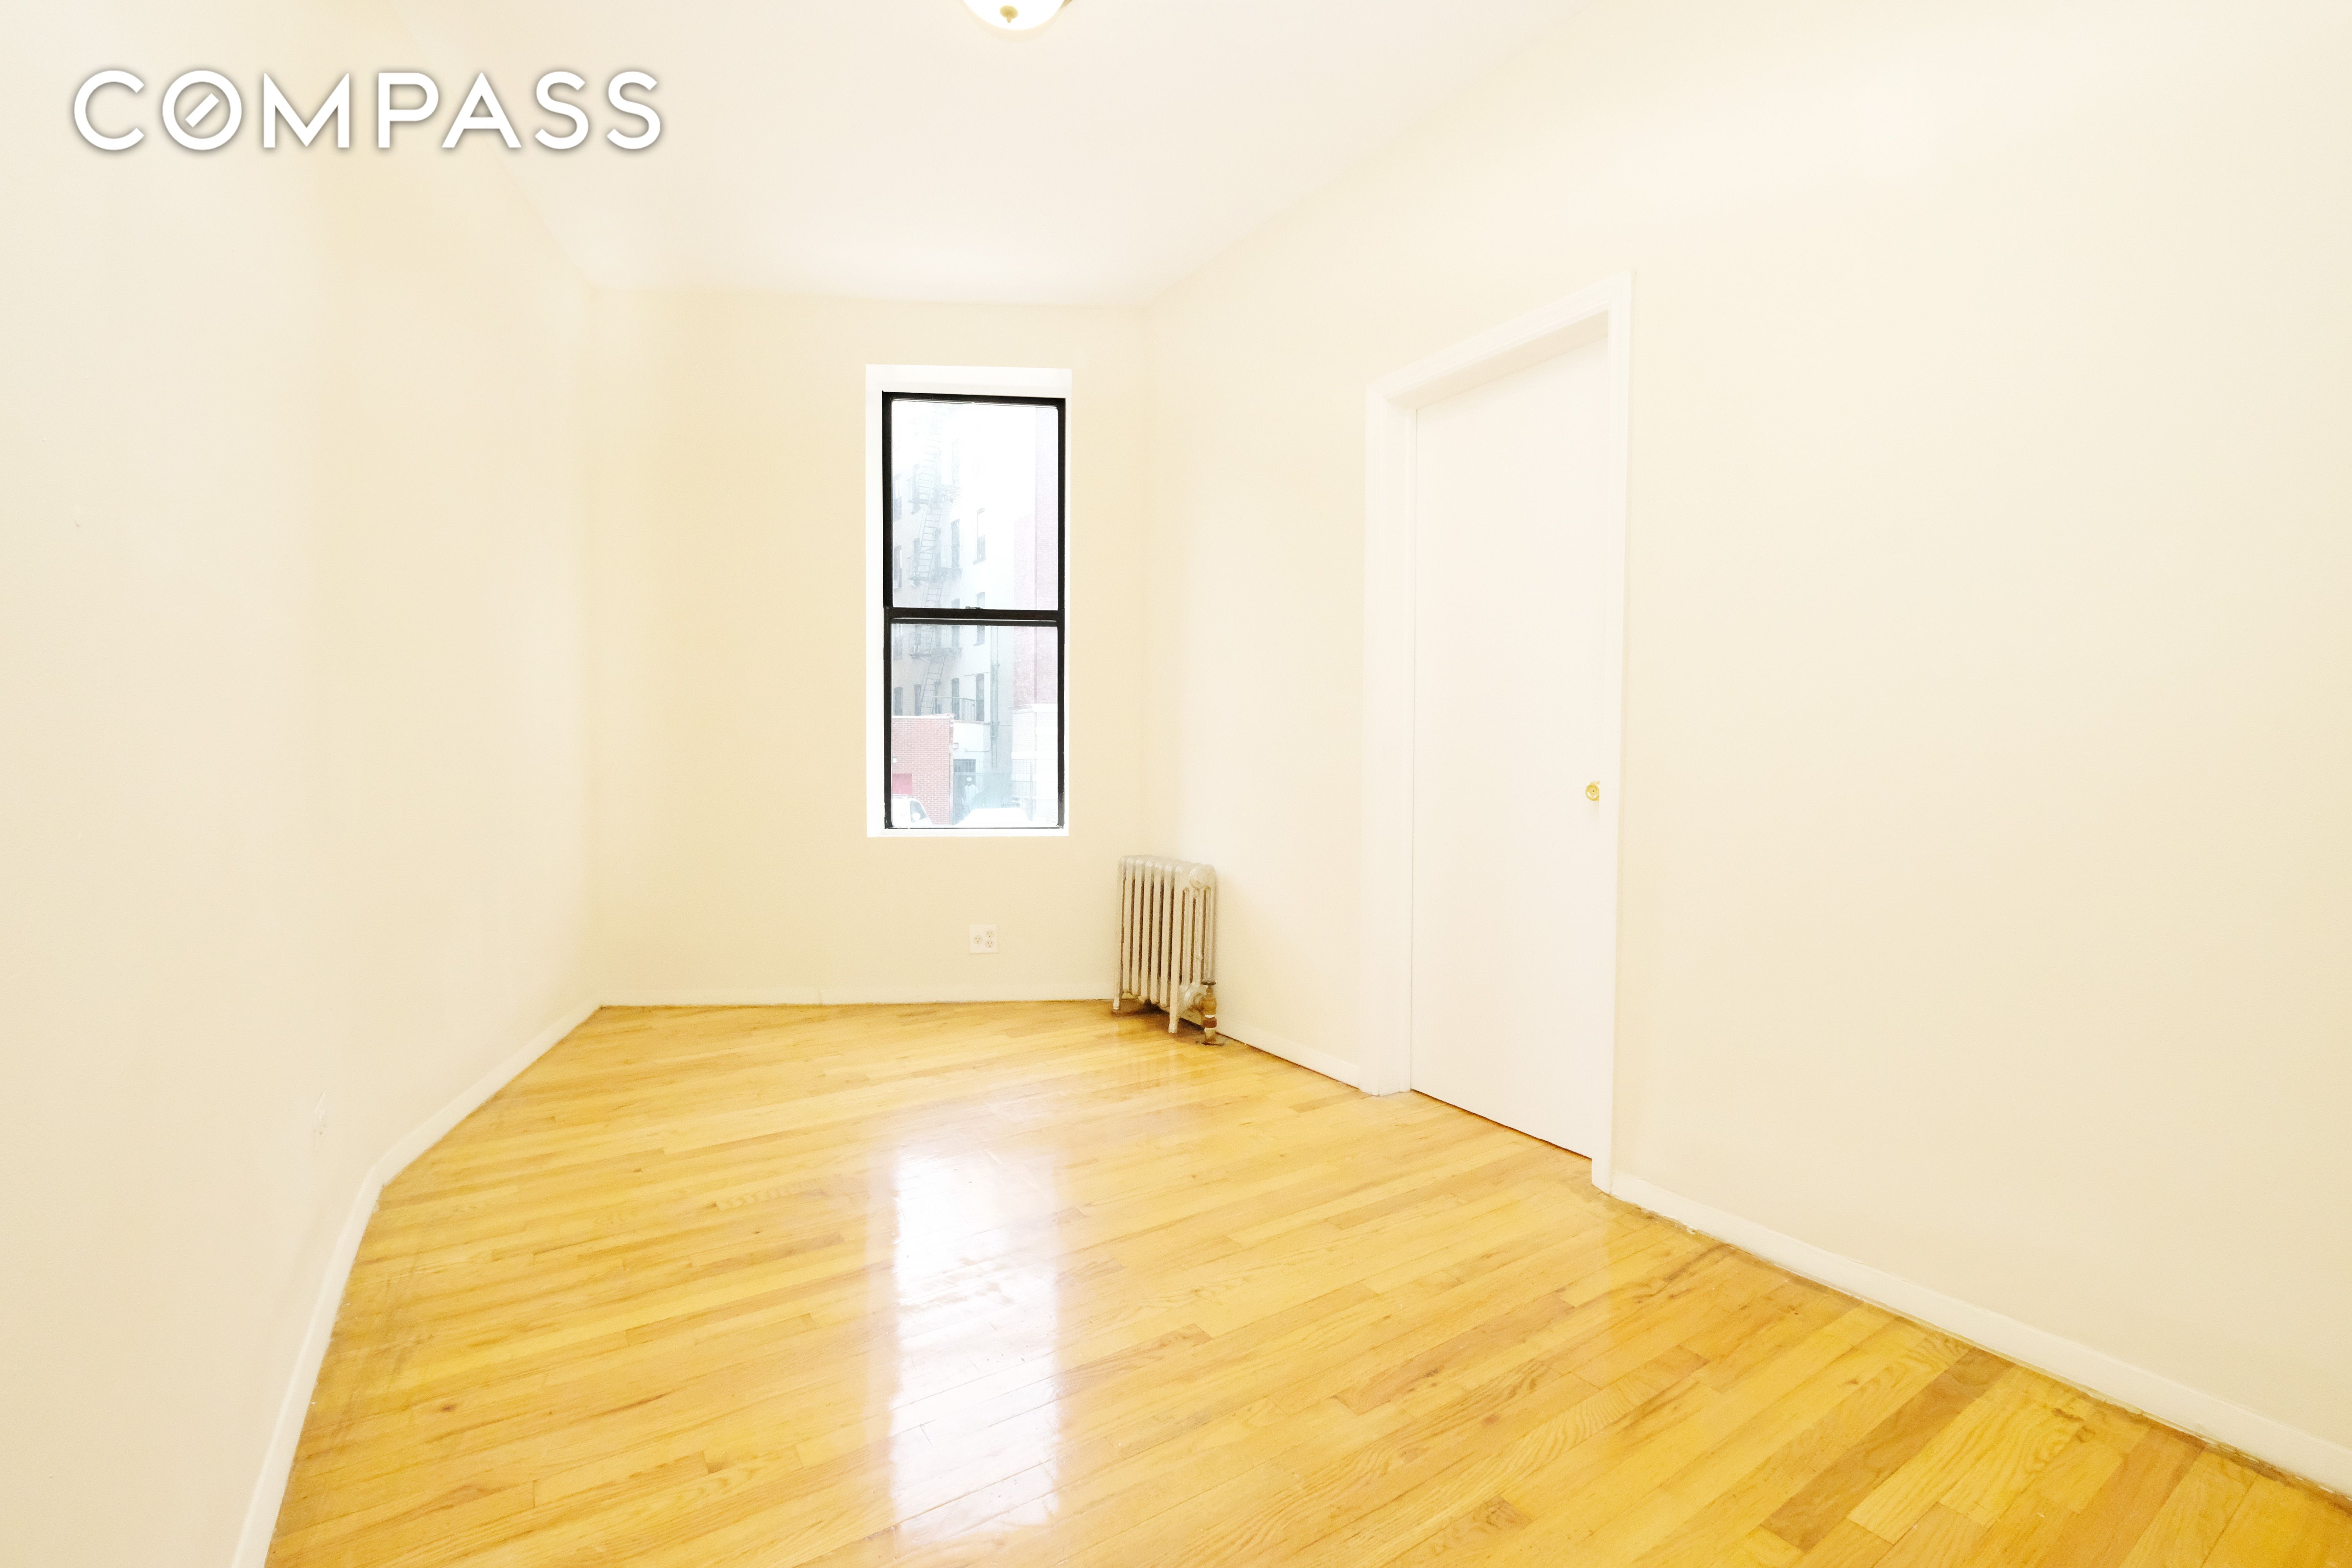 28 Macombs Place 21, Central Harlem, Upper Manhattan, NYC - 2 Bedrooms  
1 Bathrooms  
5 Rooms - 